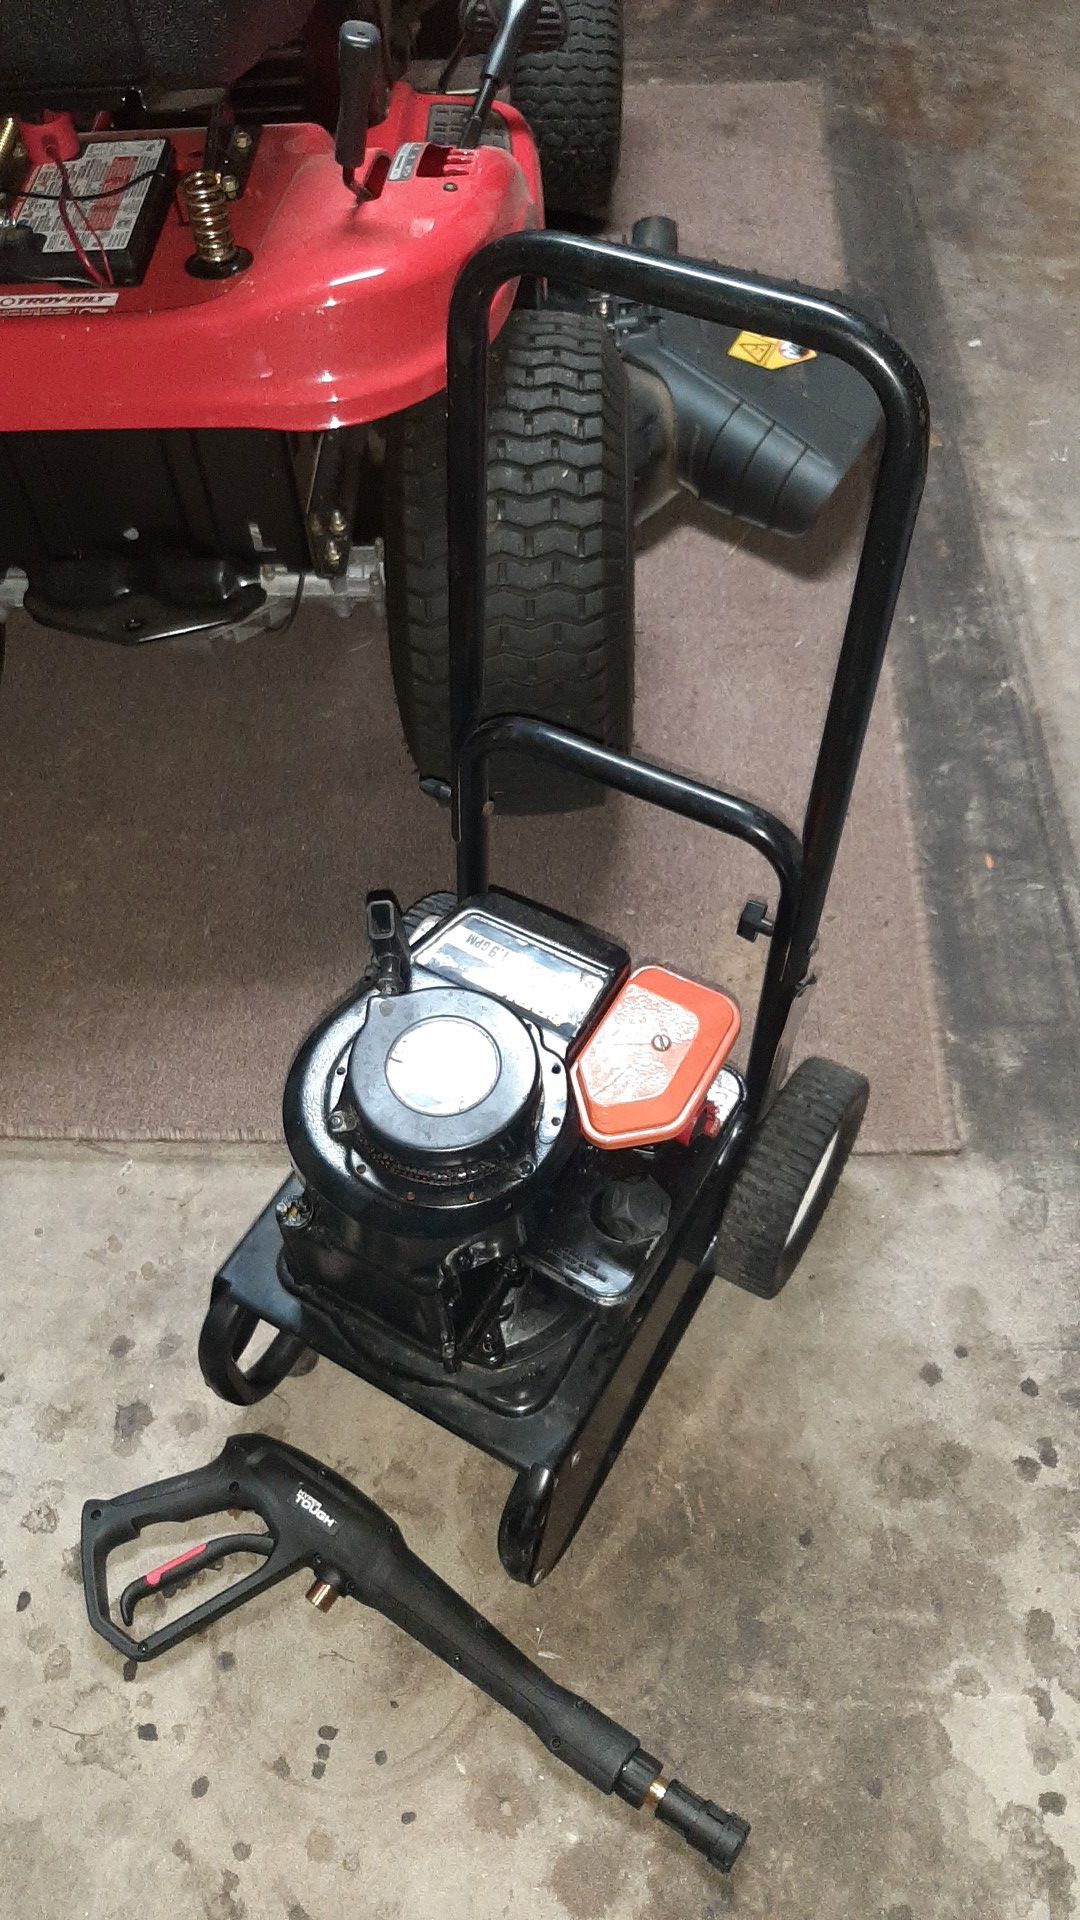 Brute,2000 psi 1.9gpm pressure washer great condition wand and washer 70.00 dollars